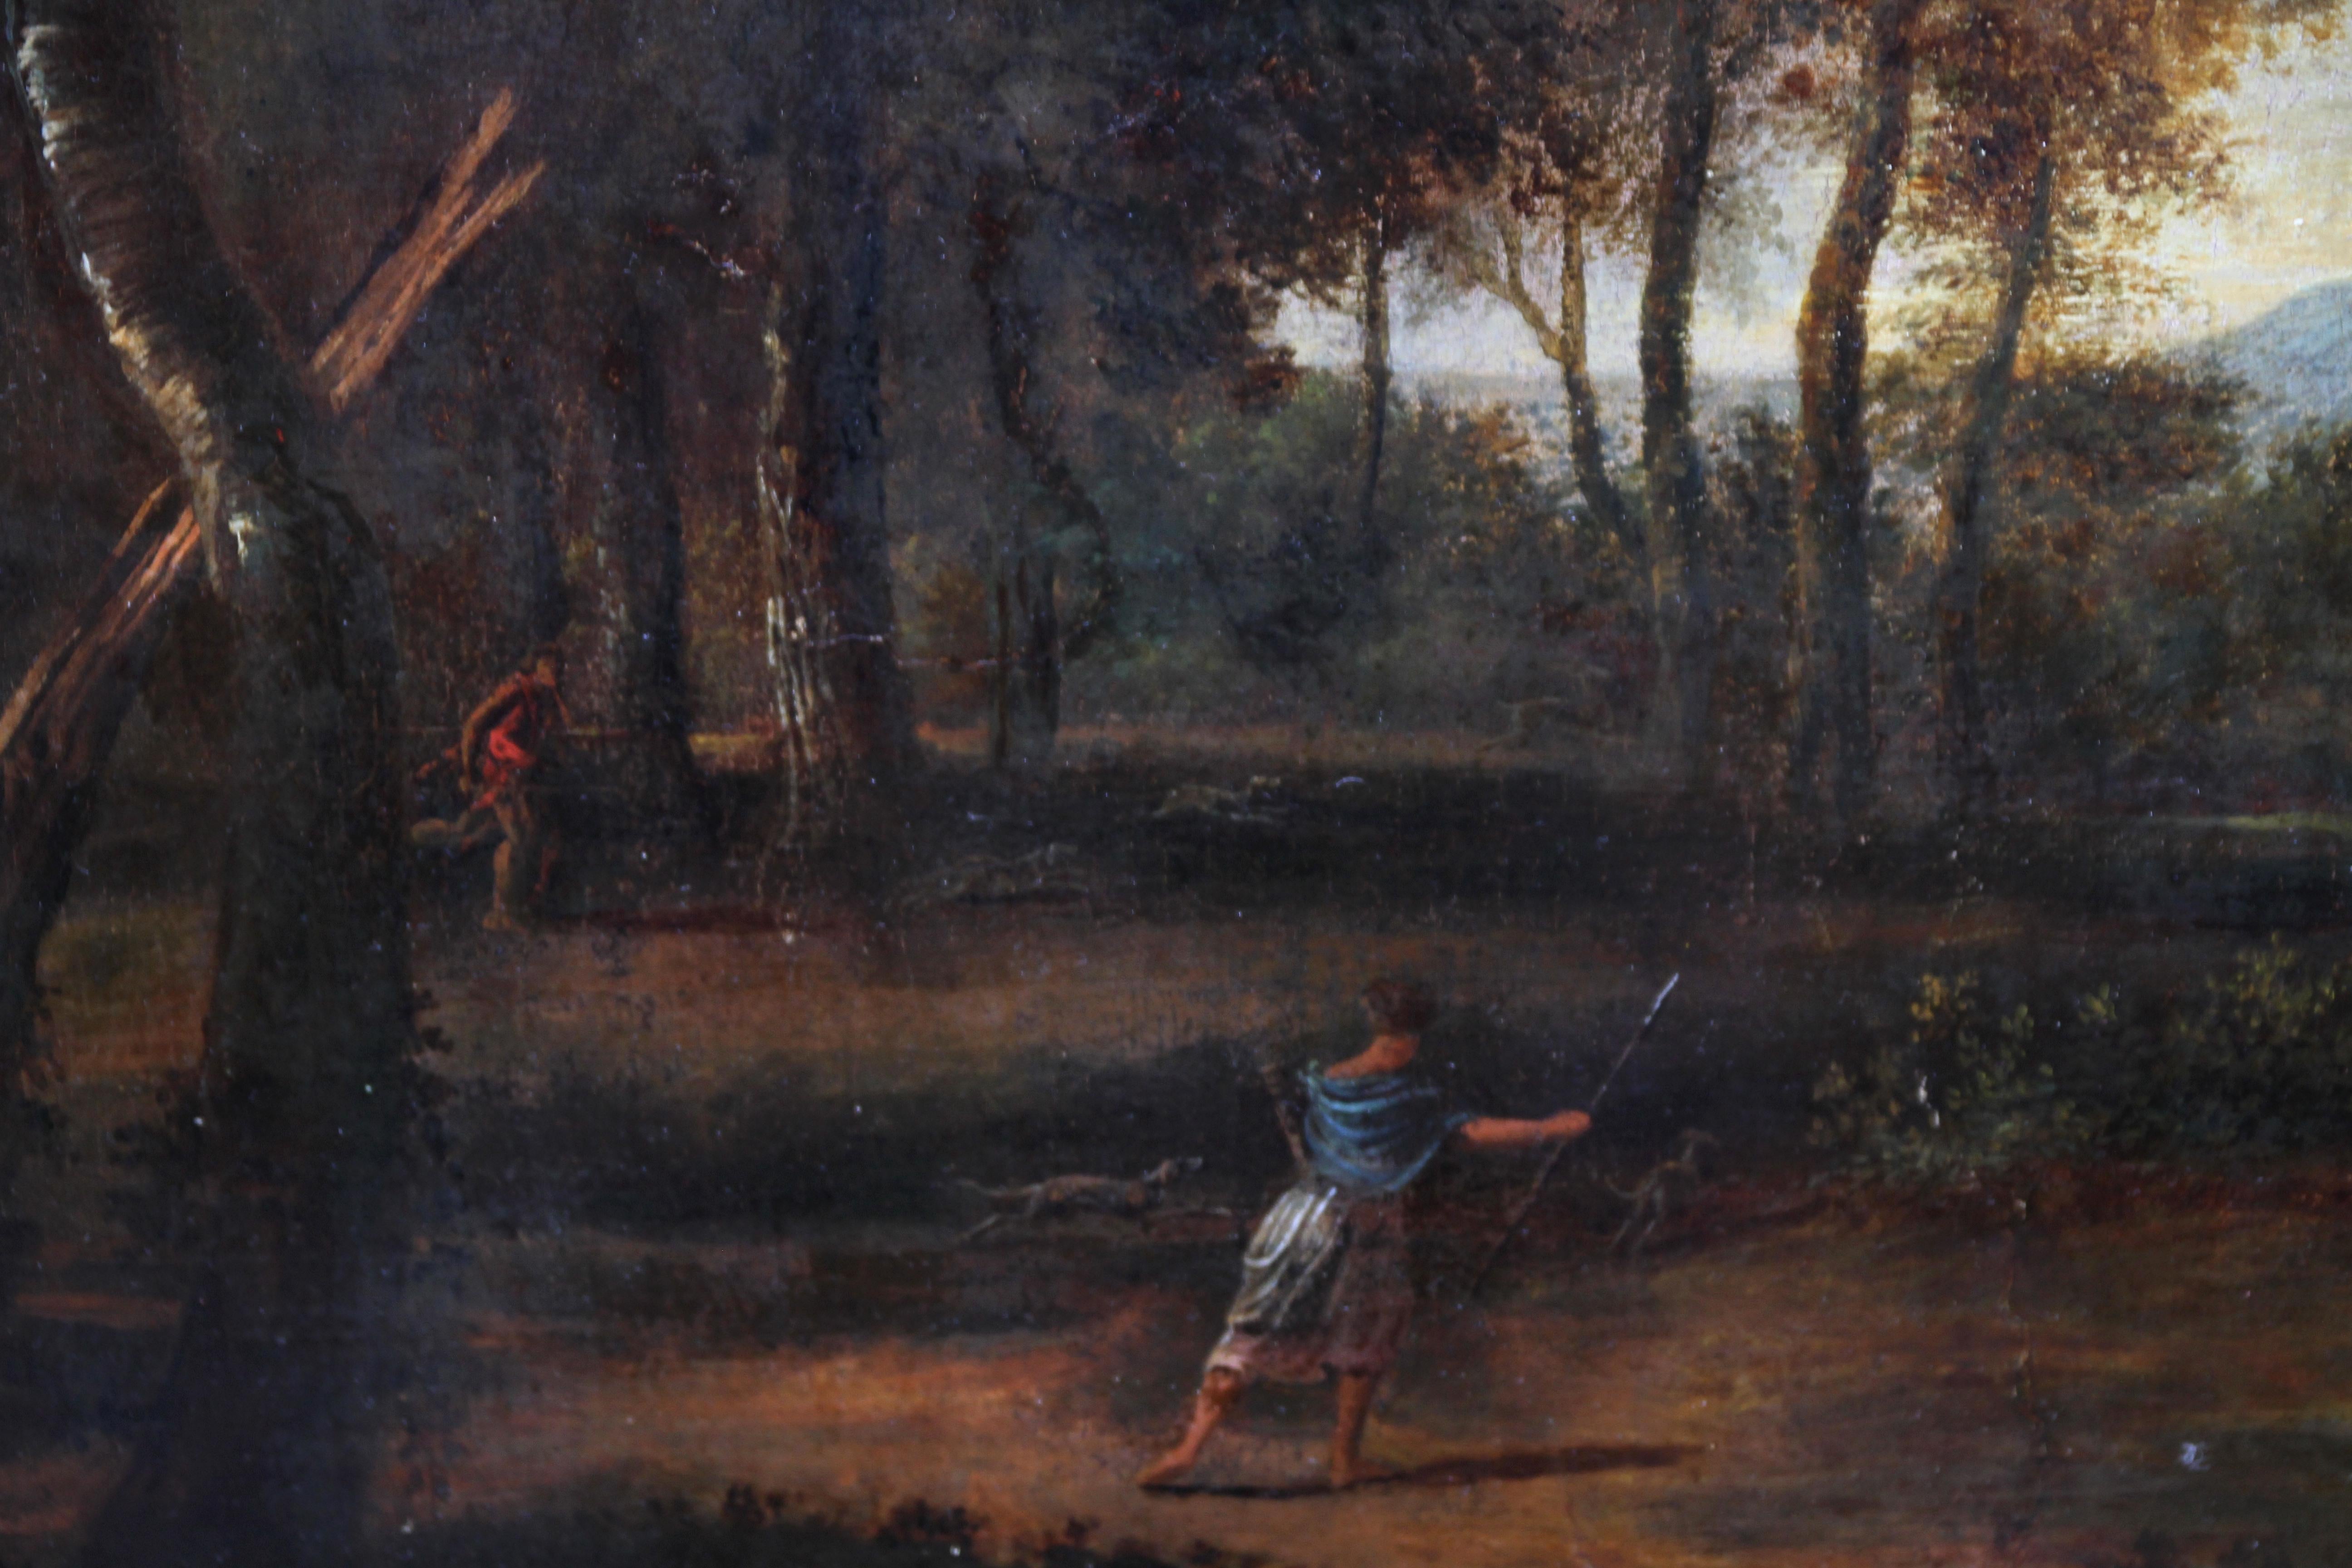 A original large French Old Master oil on canvas which is by Millet (1642-1679) and was painted circa 1675. This large canvas is in good clean condition and depicts a wooded landscape with Diana hunting. Housed in a gilded carved 18th century frame